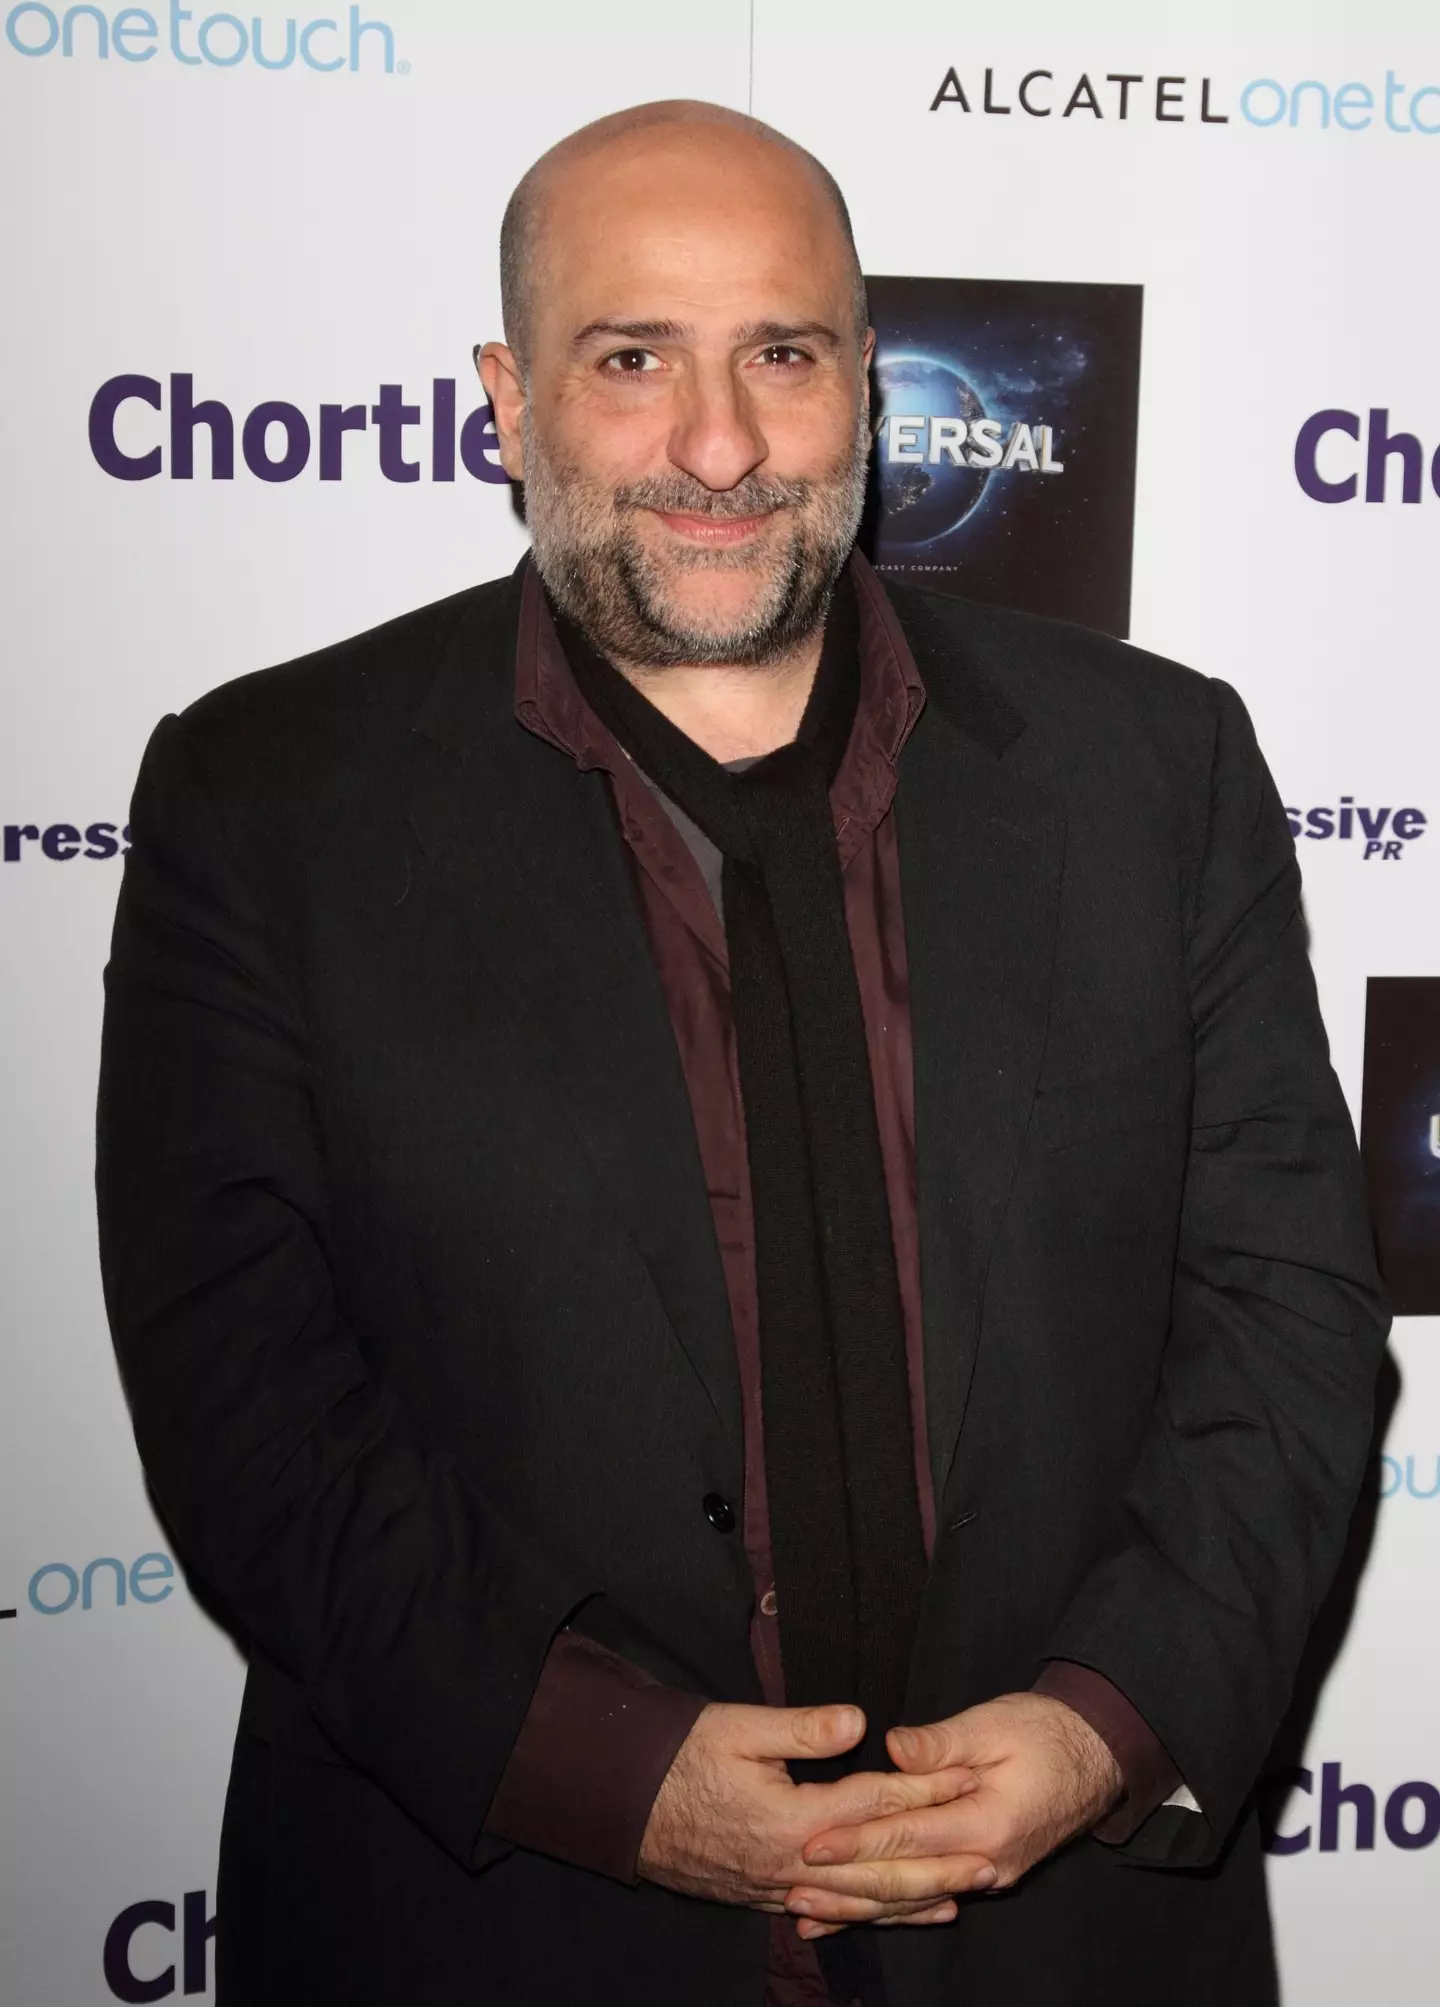 Omid Djalili has had a few run ins with the law over the years.